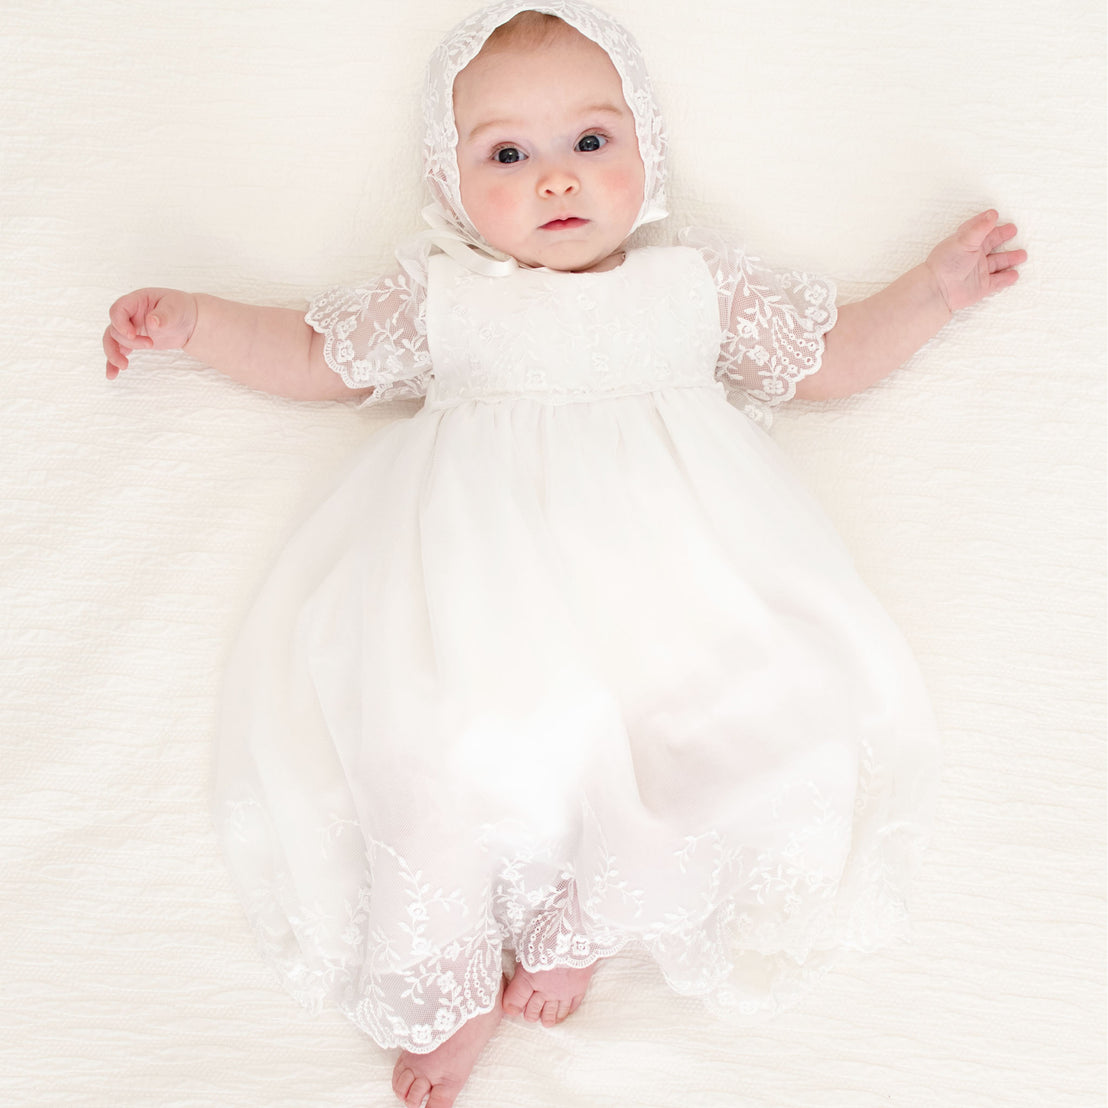 baby girl wearing romper dress with lace bonnet